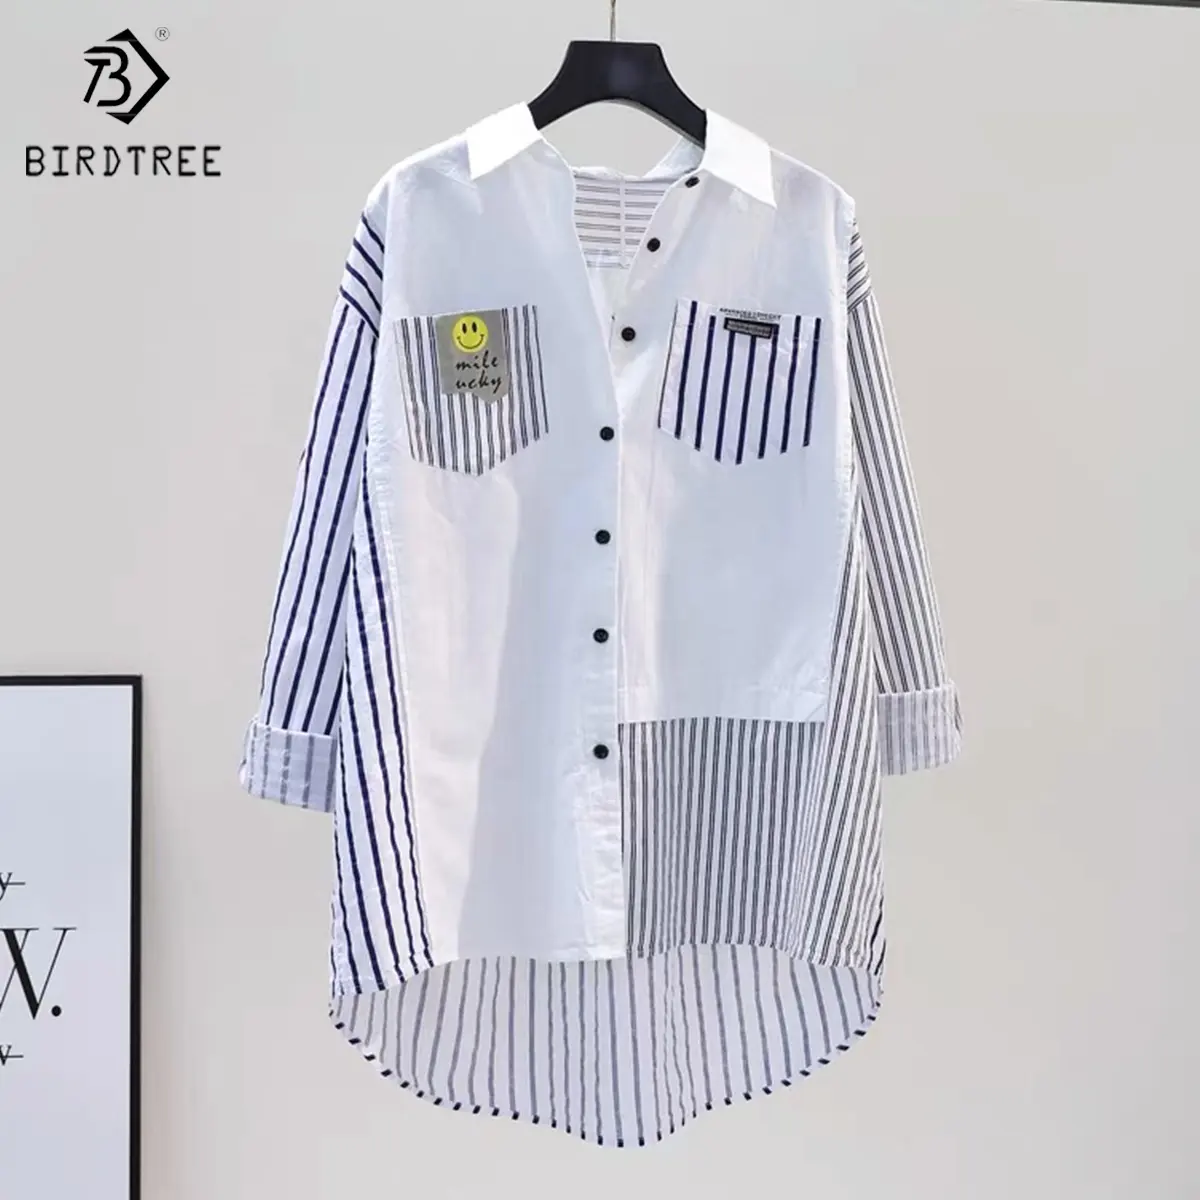 Medium Long Shirt Woman 2022 Spring New Loose Patchwork Emboridery Long Sleeves Pocket Cotton Blouses Shirts Tops For Au T31505X